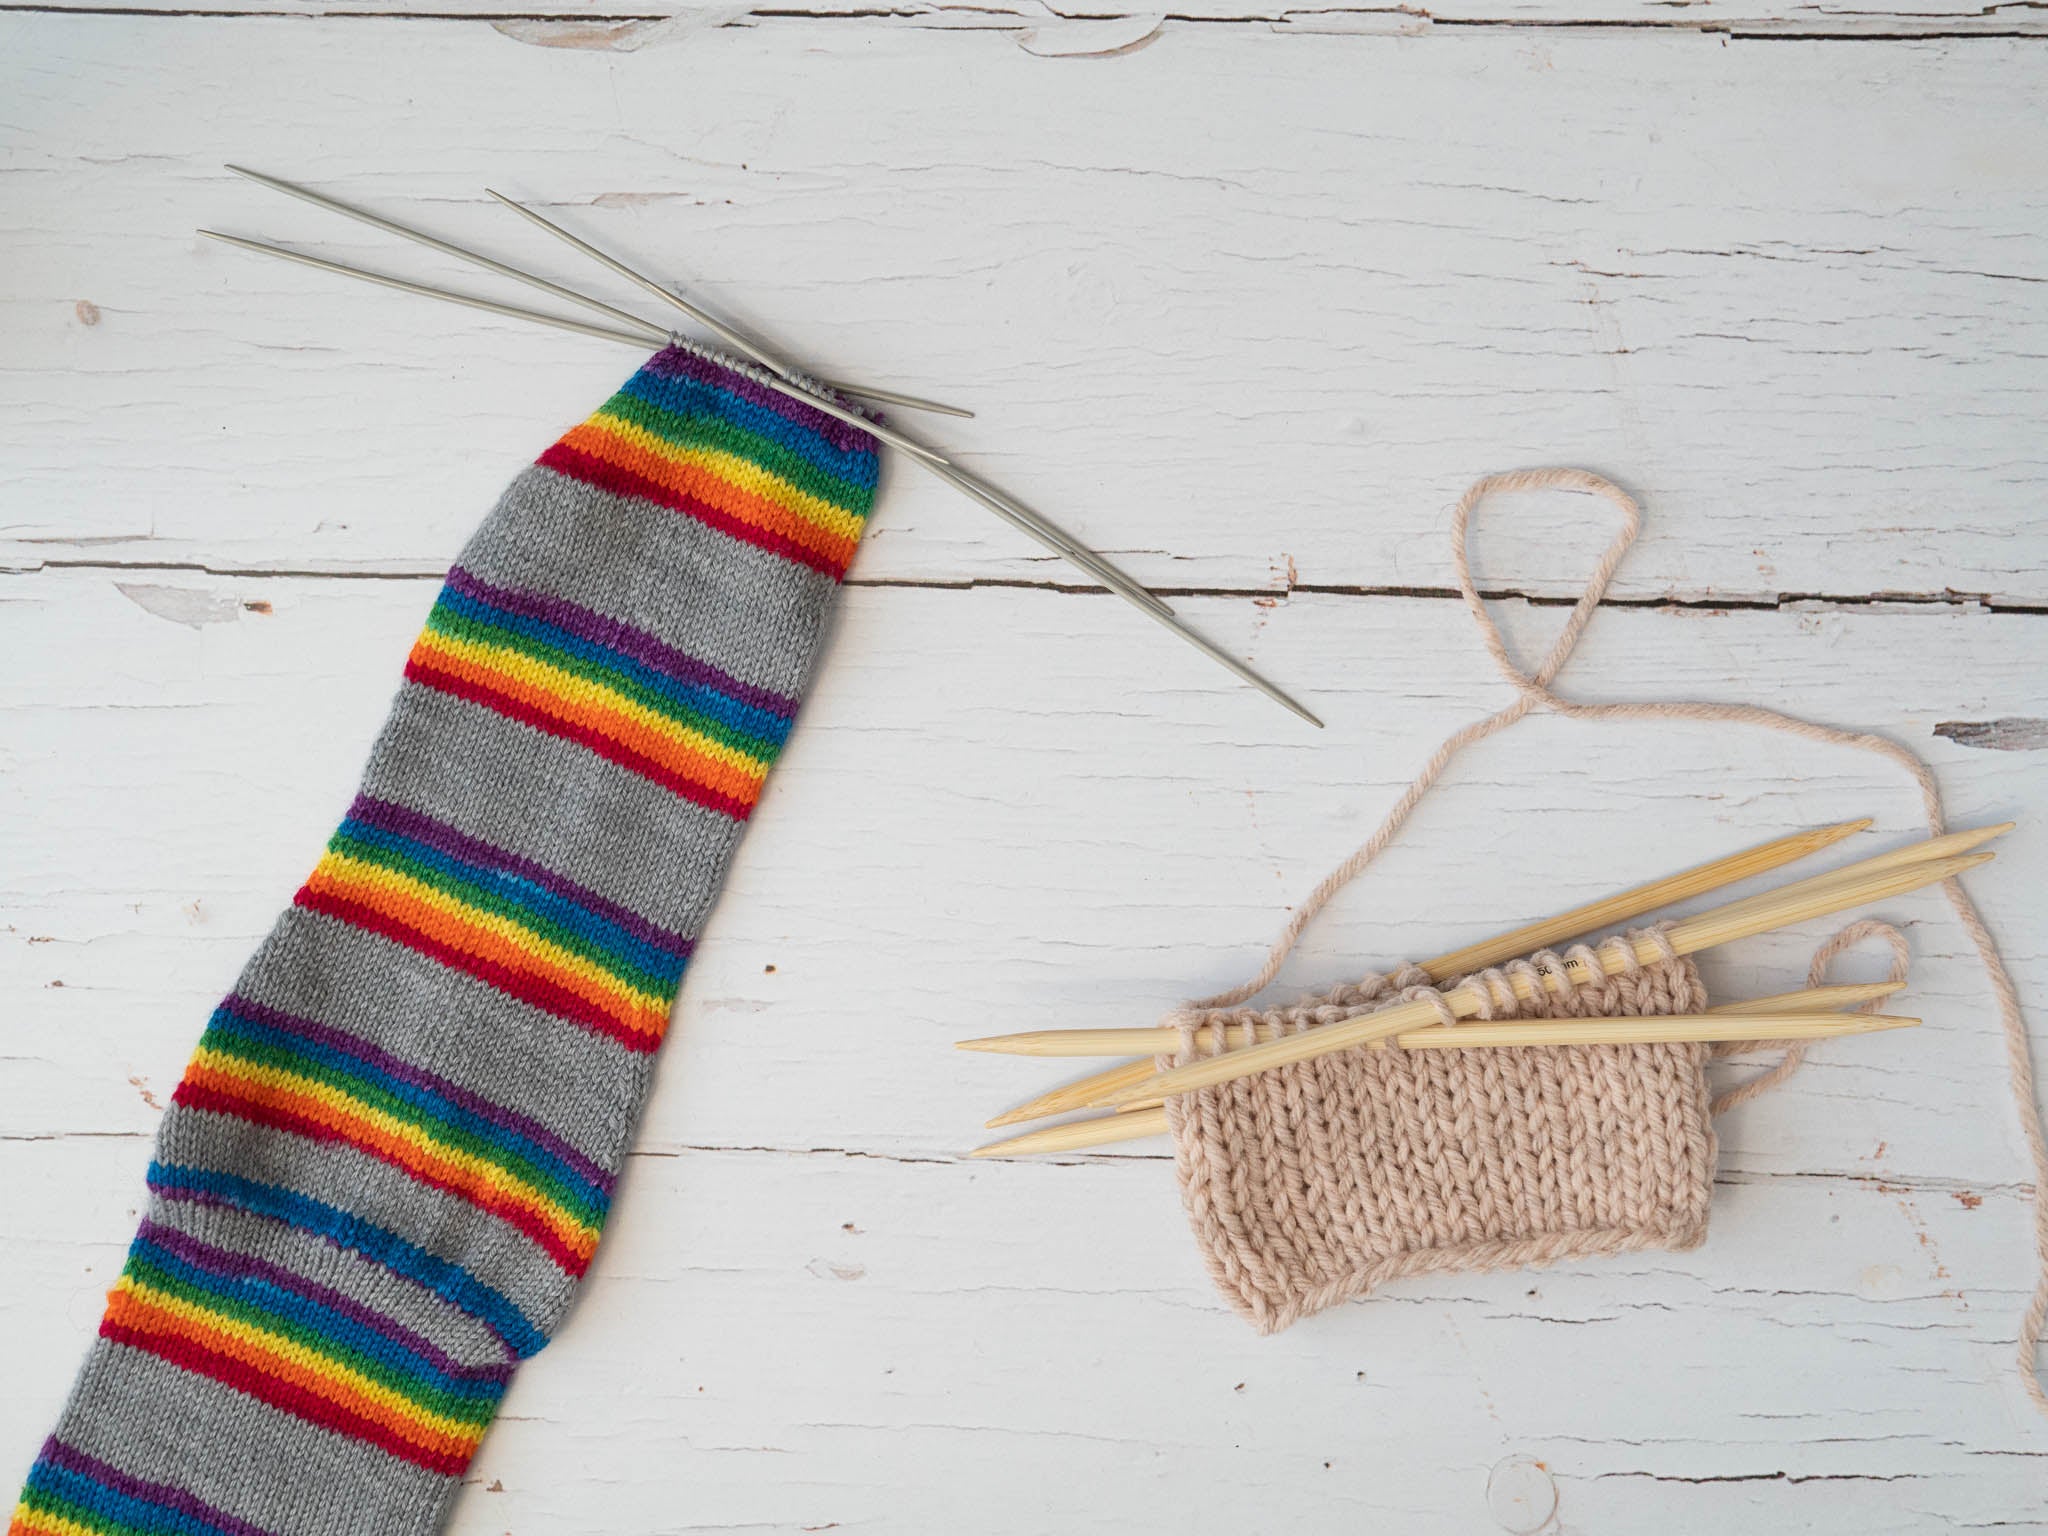 Learn to knit: How to knit in the round with double pointed